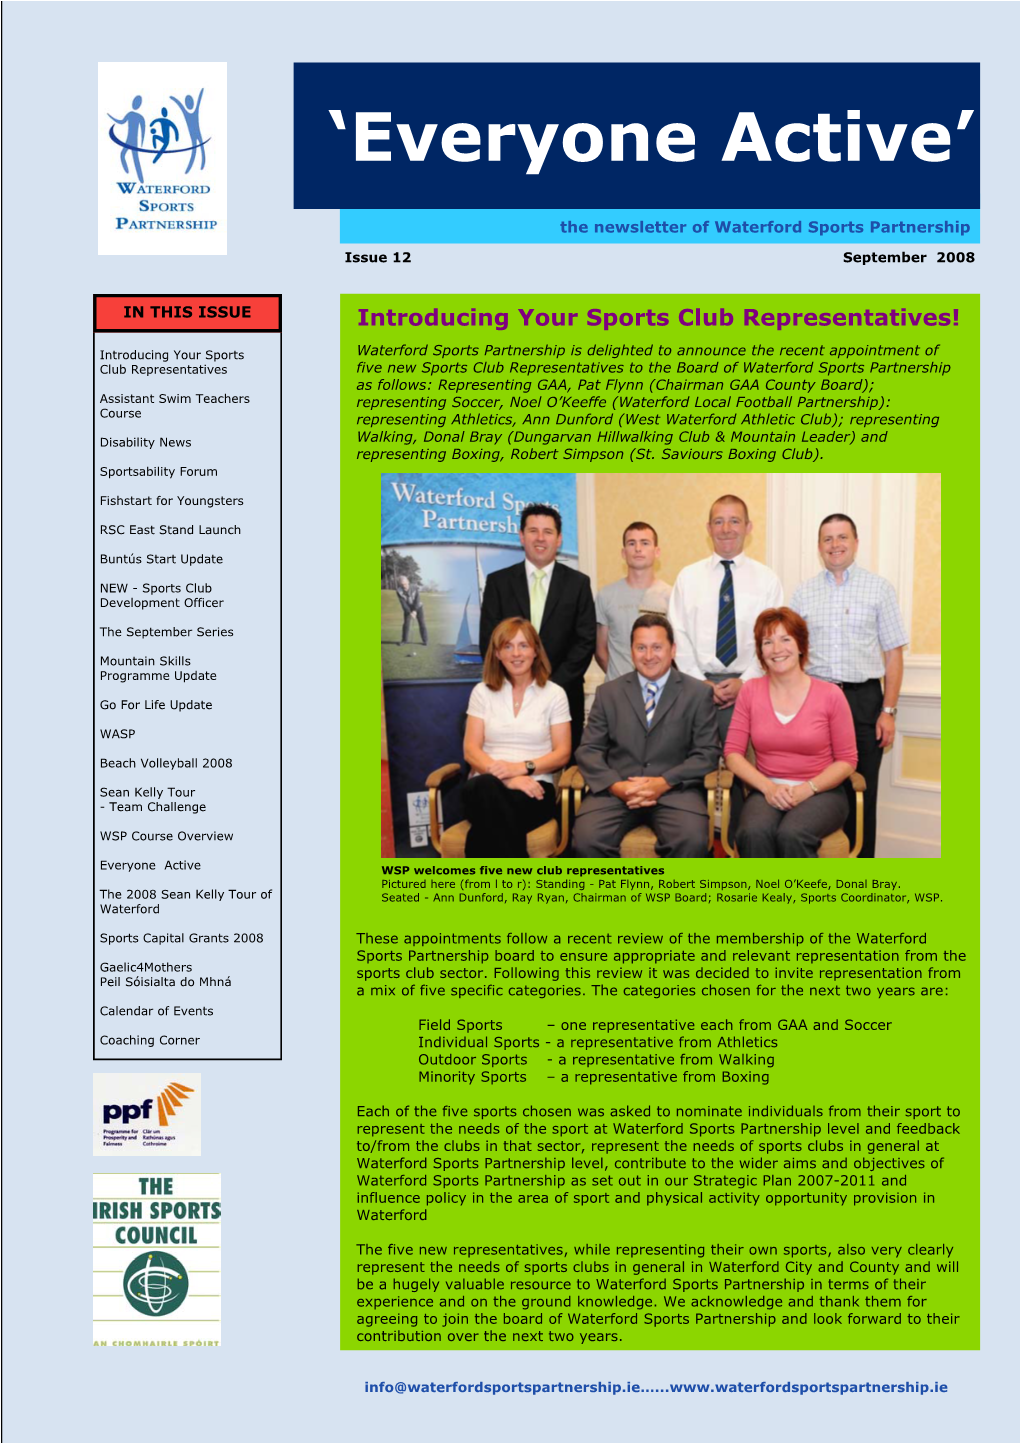 Newsletter of Waterford Sports Partnership